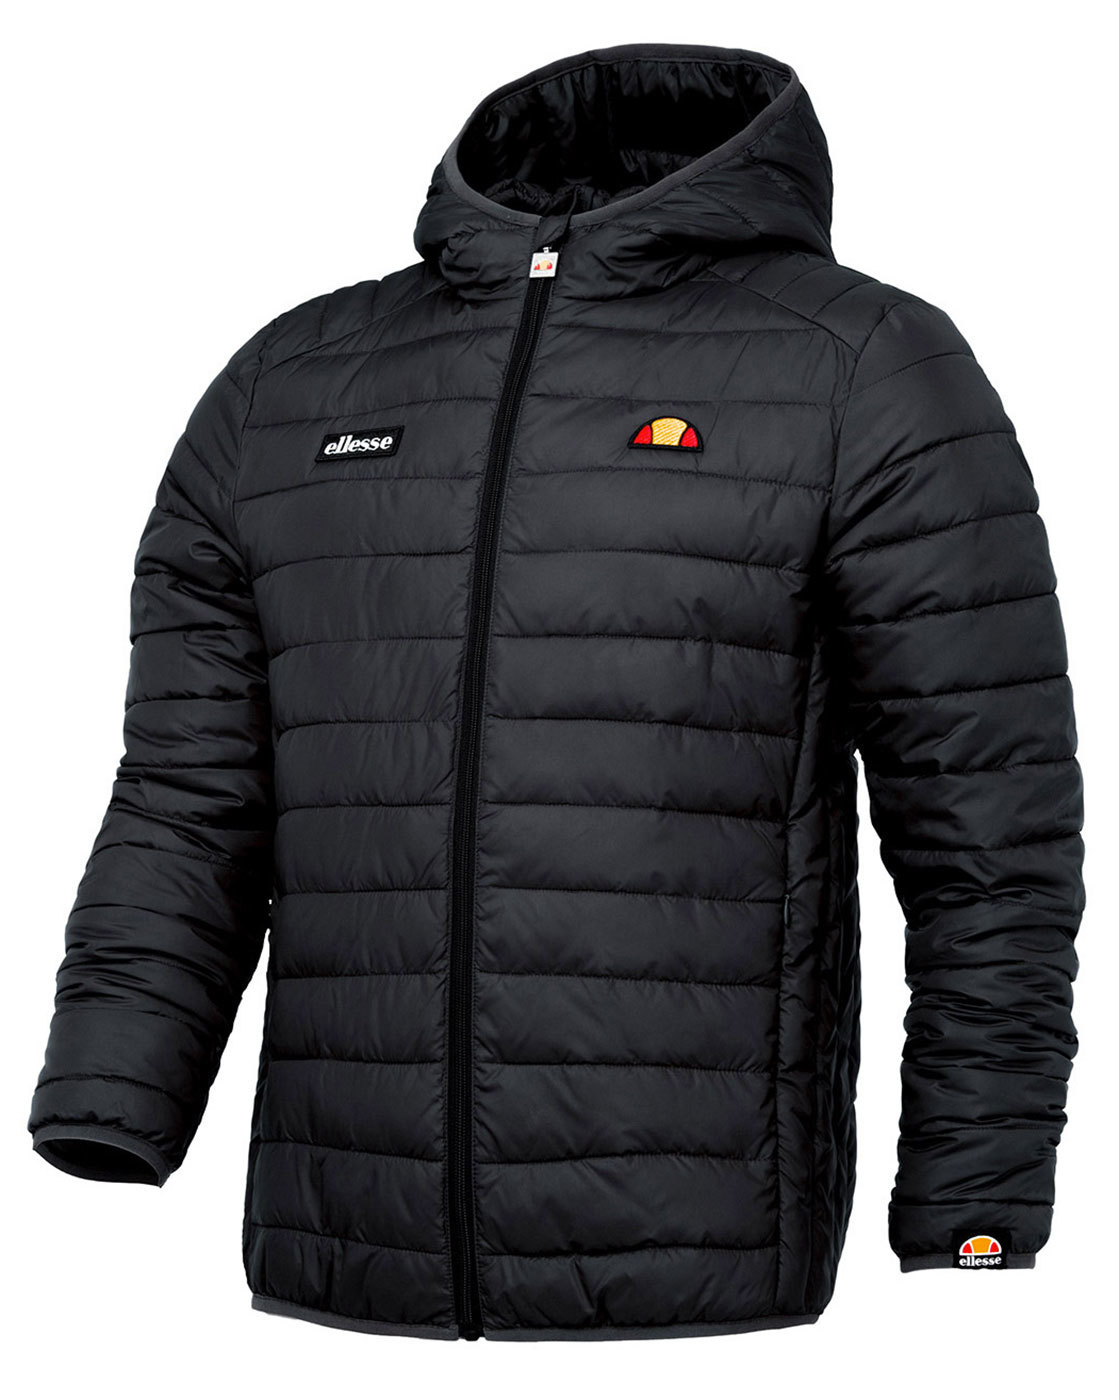 Lombardy ELLESSE Retro 70s Mens Quilted Ski Jacket